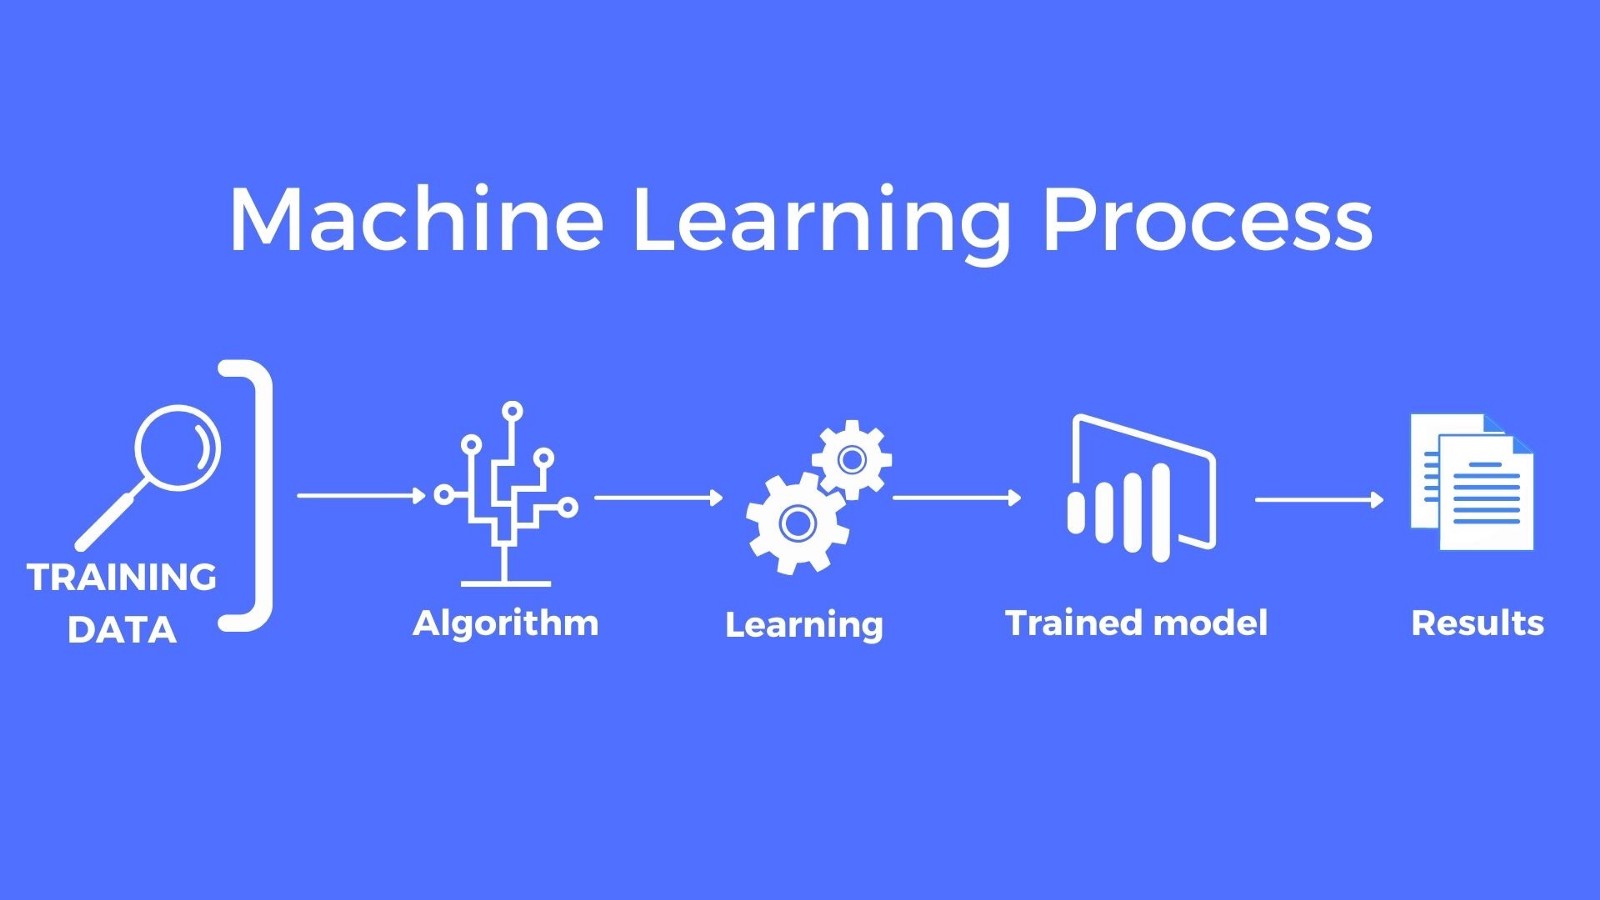 The heading says "Machine Learning Process". Underneath, there are 5 icons with arrows to illustrate the process. The first one is "training data", "algorithm", "learning", "trained model", and finally "results".